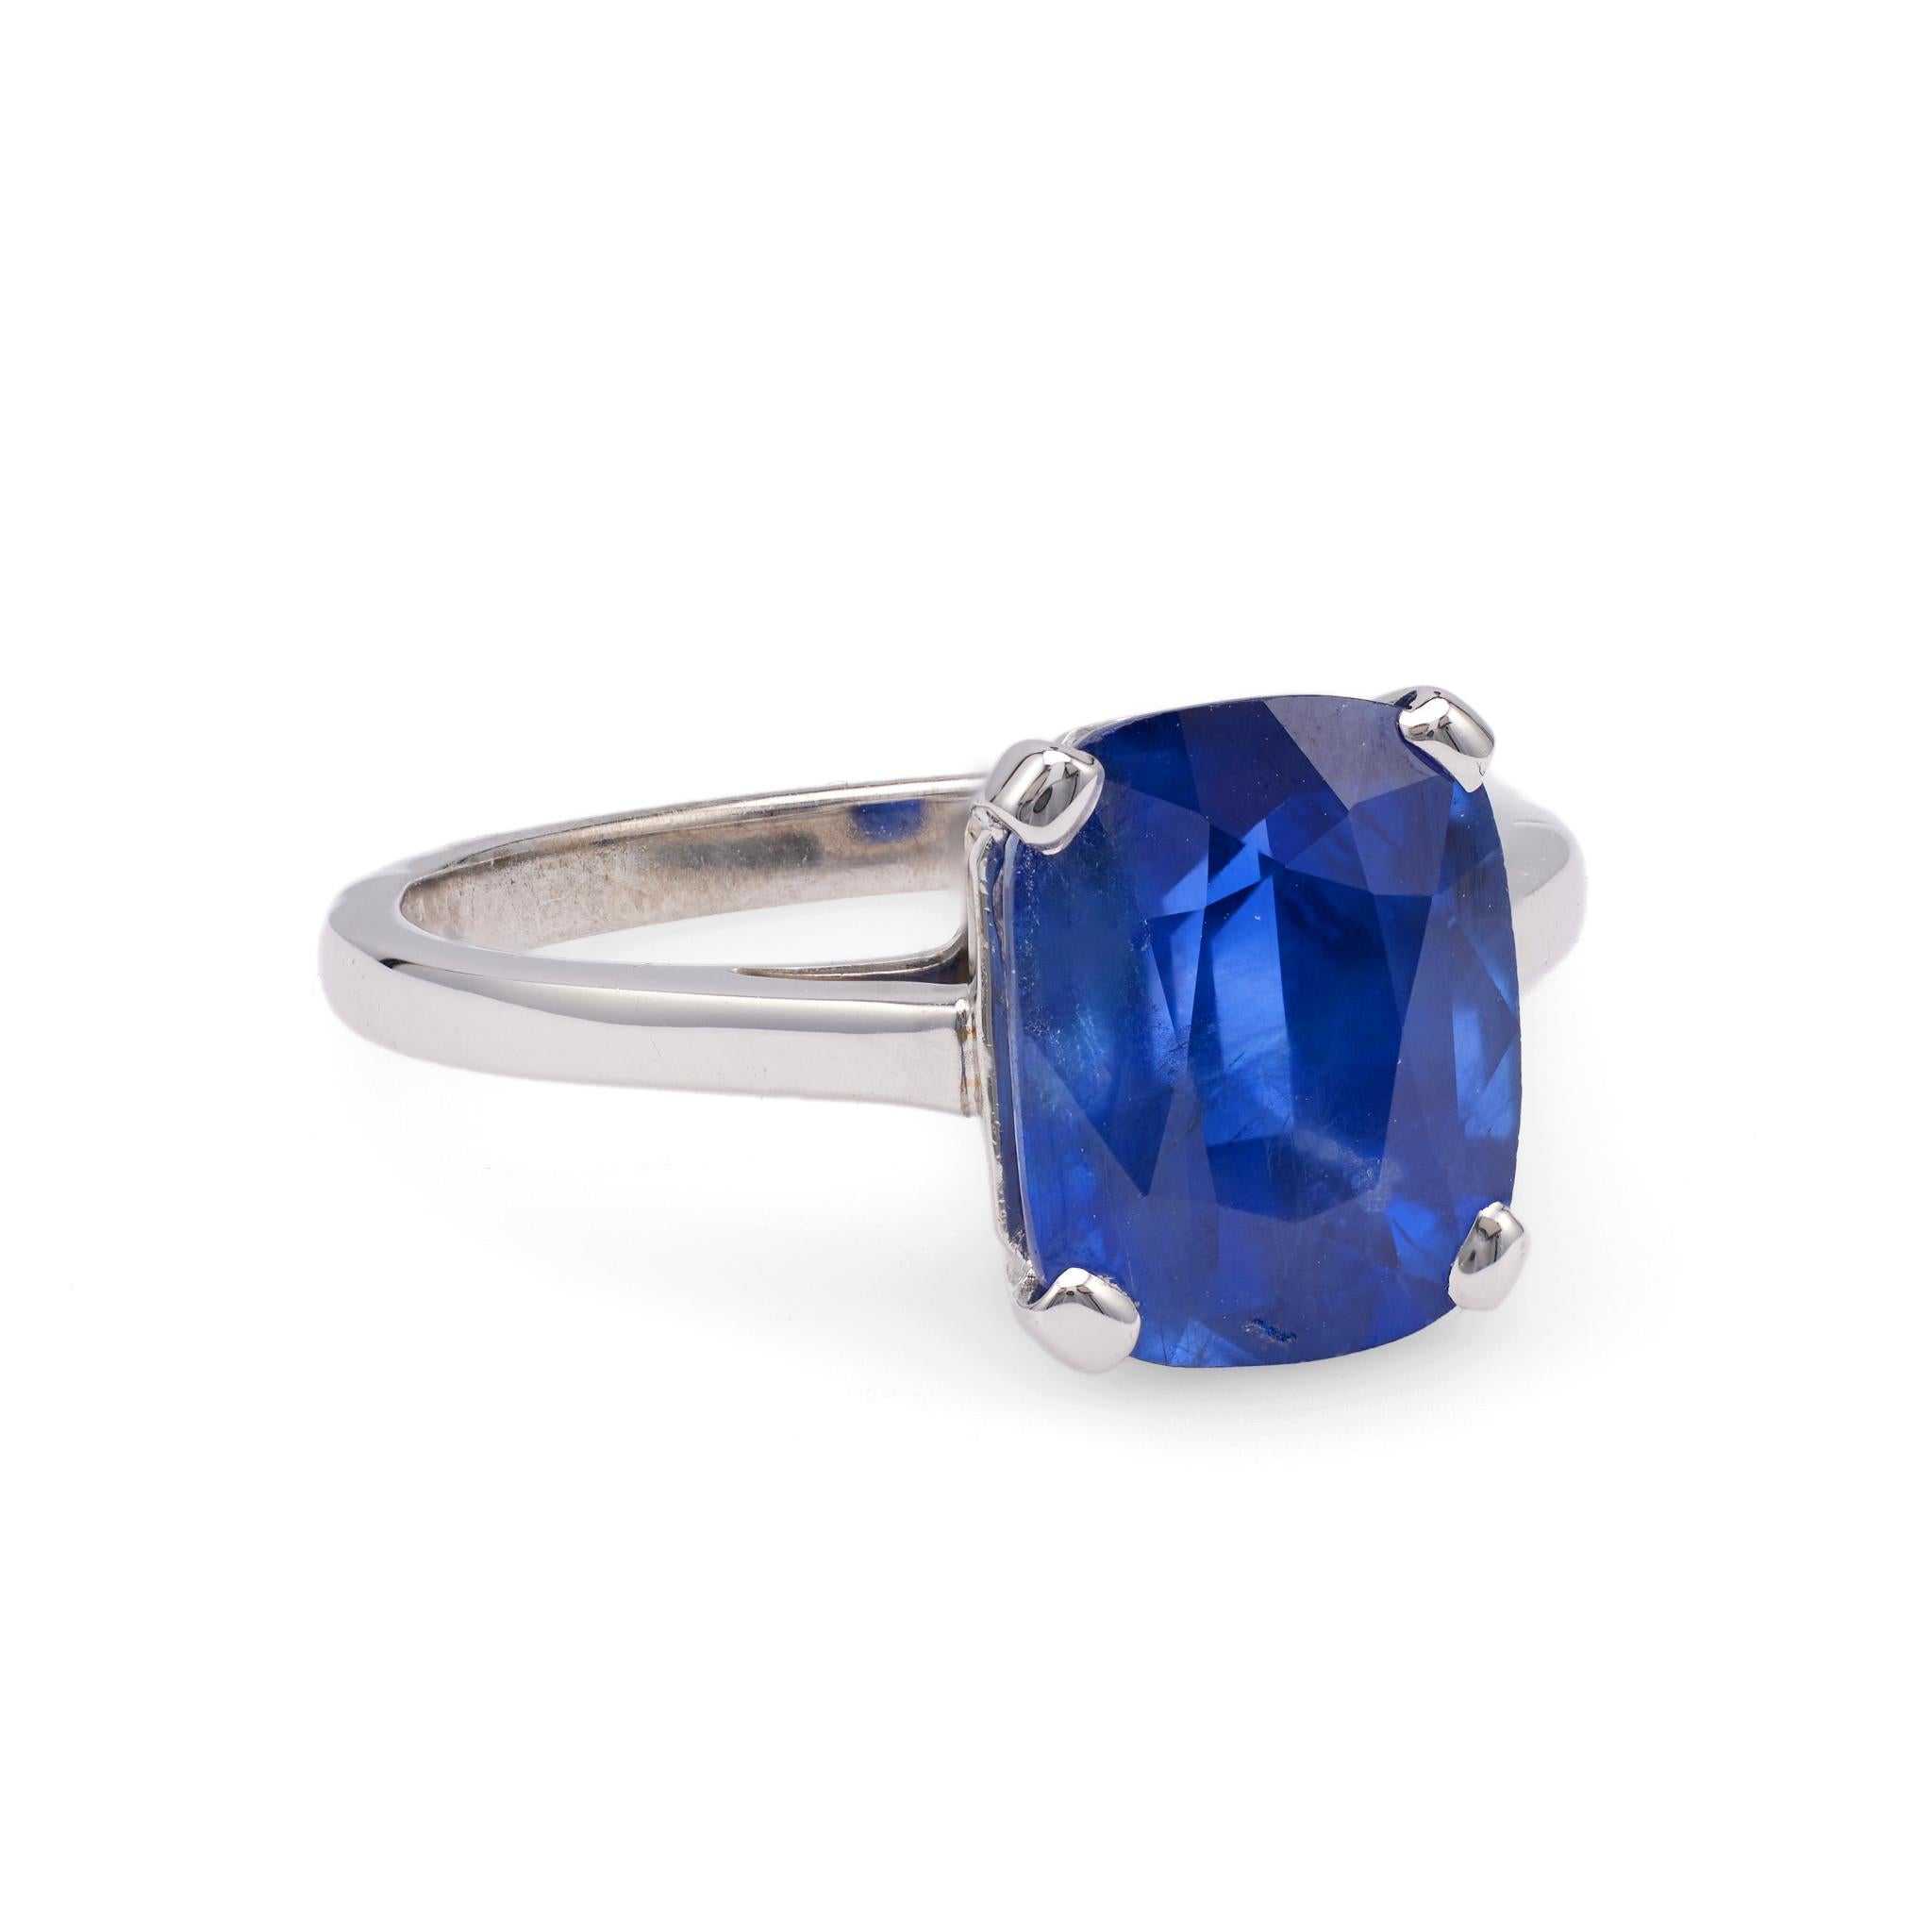 Vintage French GIA 4.24 Carat Ceylon Sapphire 18k White Gold Solitaire Ring In Good Condition For Sale In Beverly Hills, CA